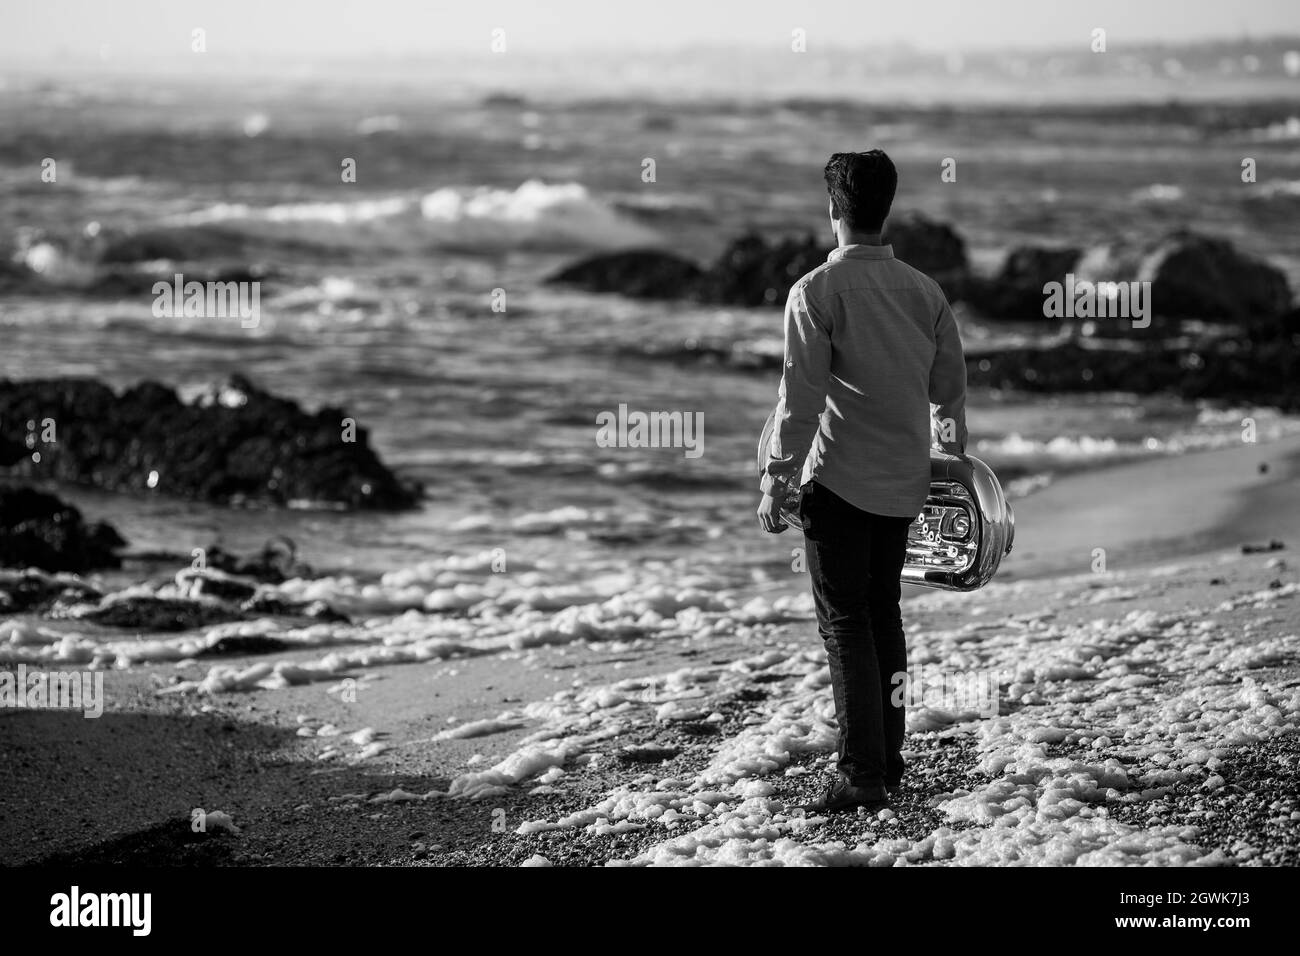 A musician man with a tuba on the seashore. Black and white photo. Stock Photo